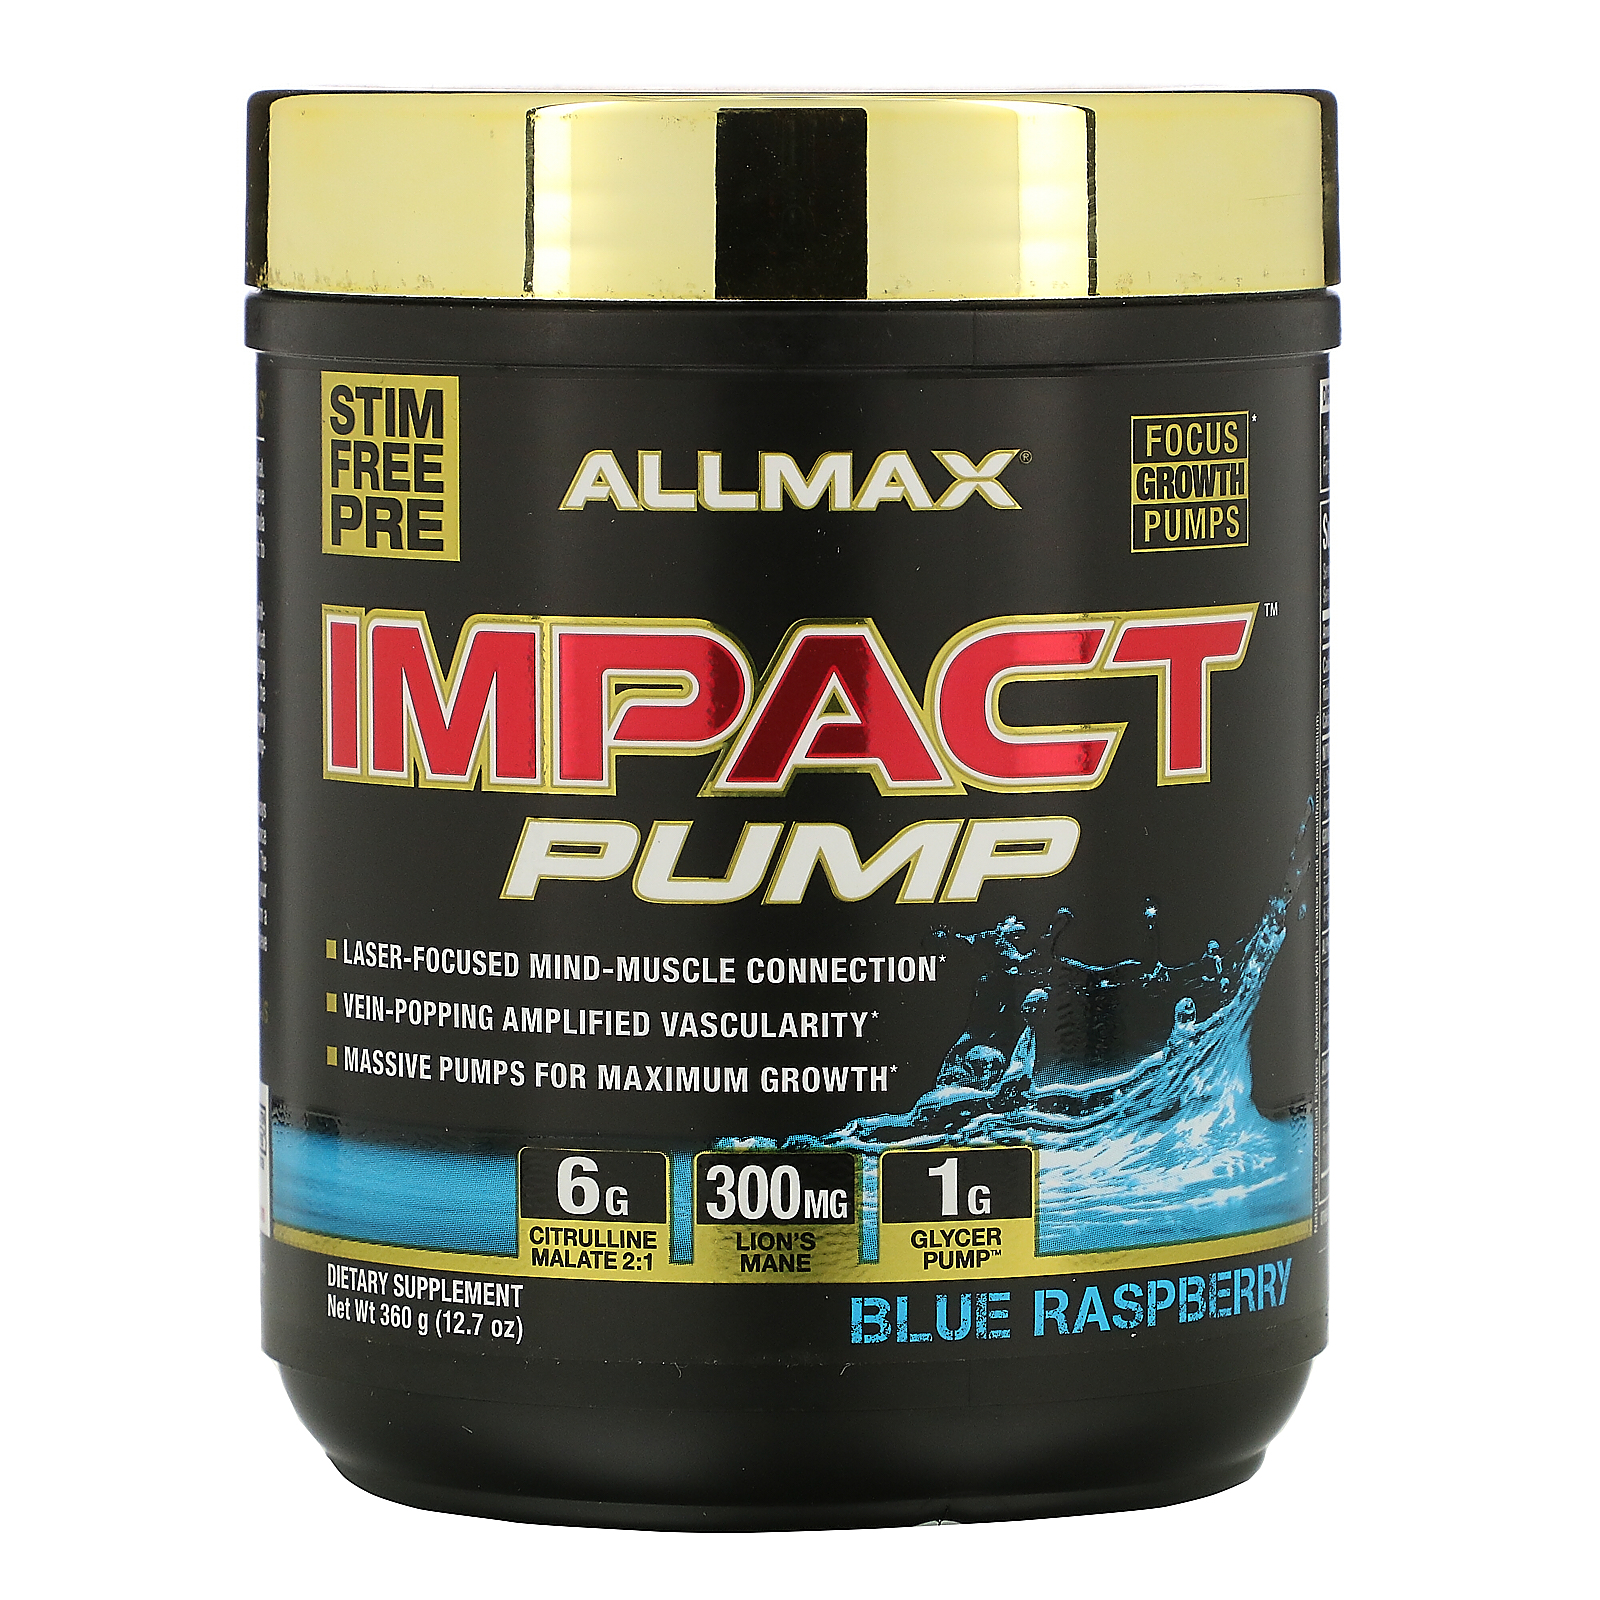 Simple Allmax pre workout for Push Pull Legs